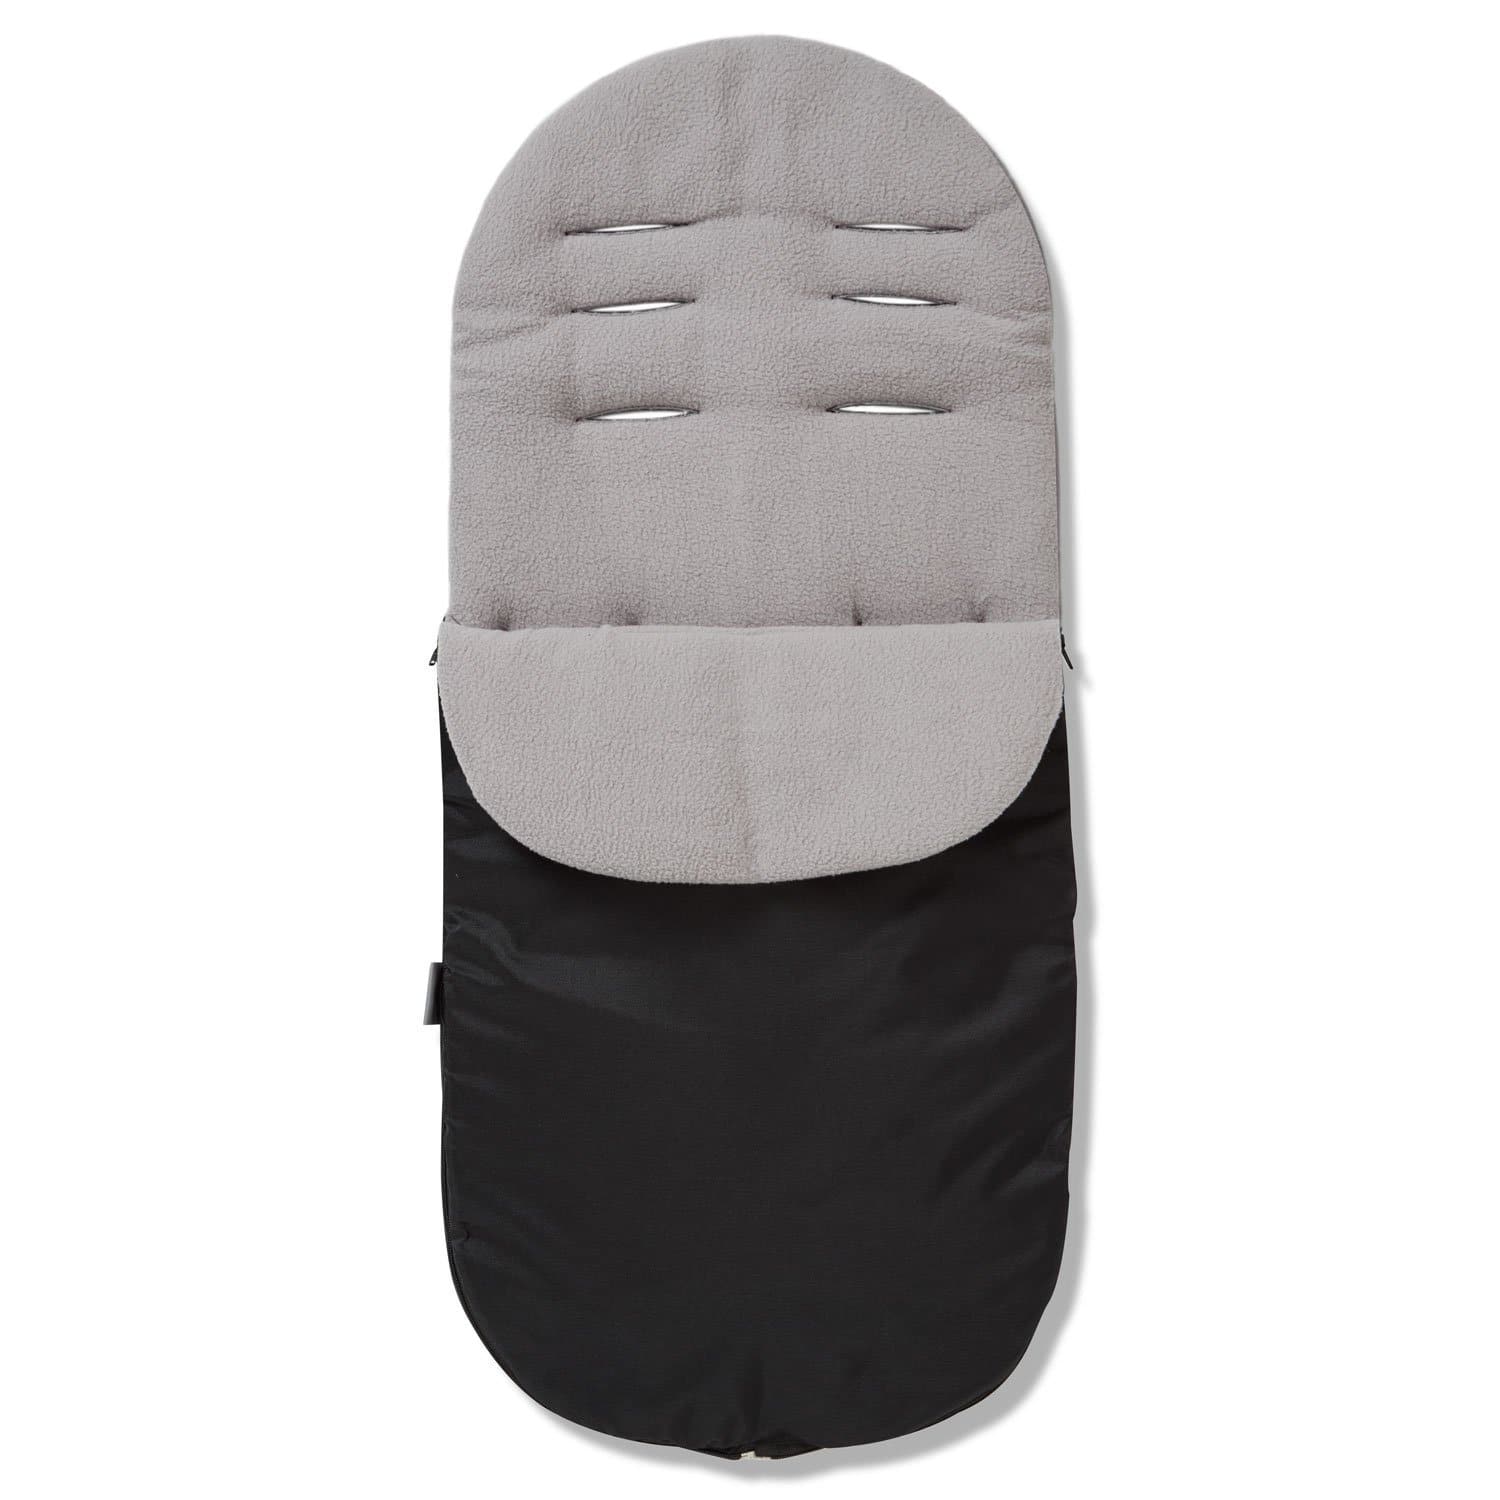 Footmuff / Cosy Toes Compatible with Pericles - For Your Little One